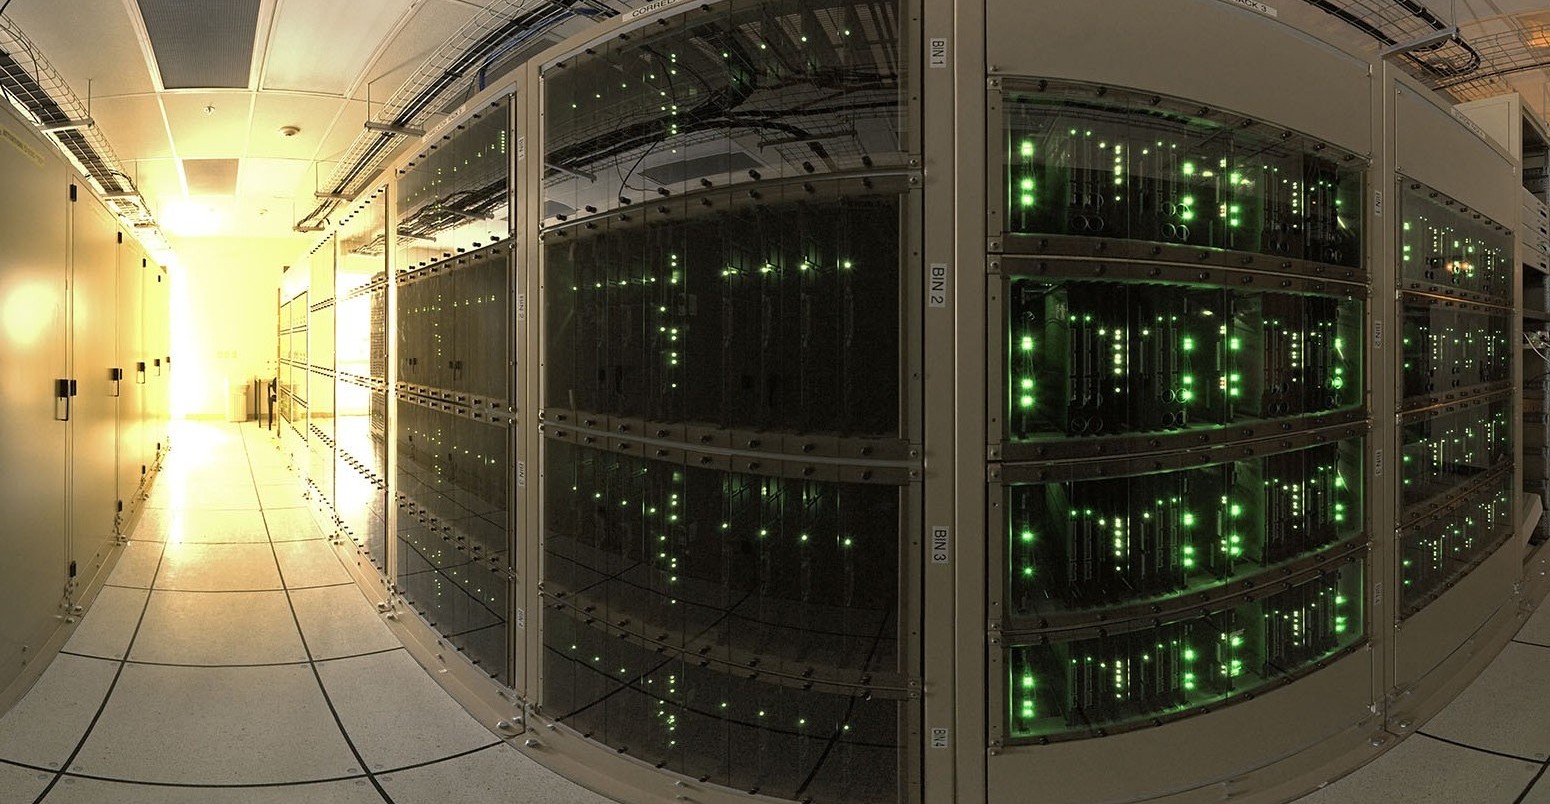 ESO's ALMA correlator, one of the most powerful supercomputers in the world